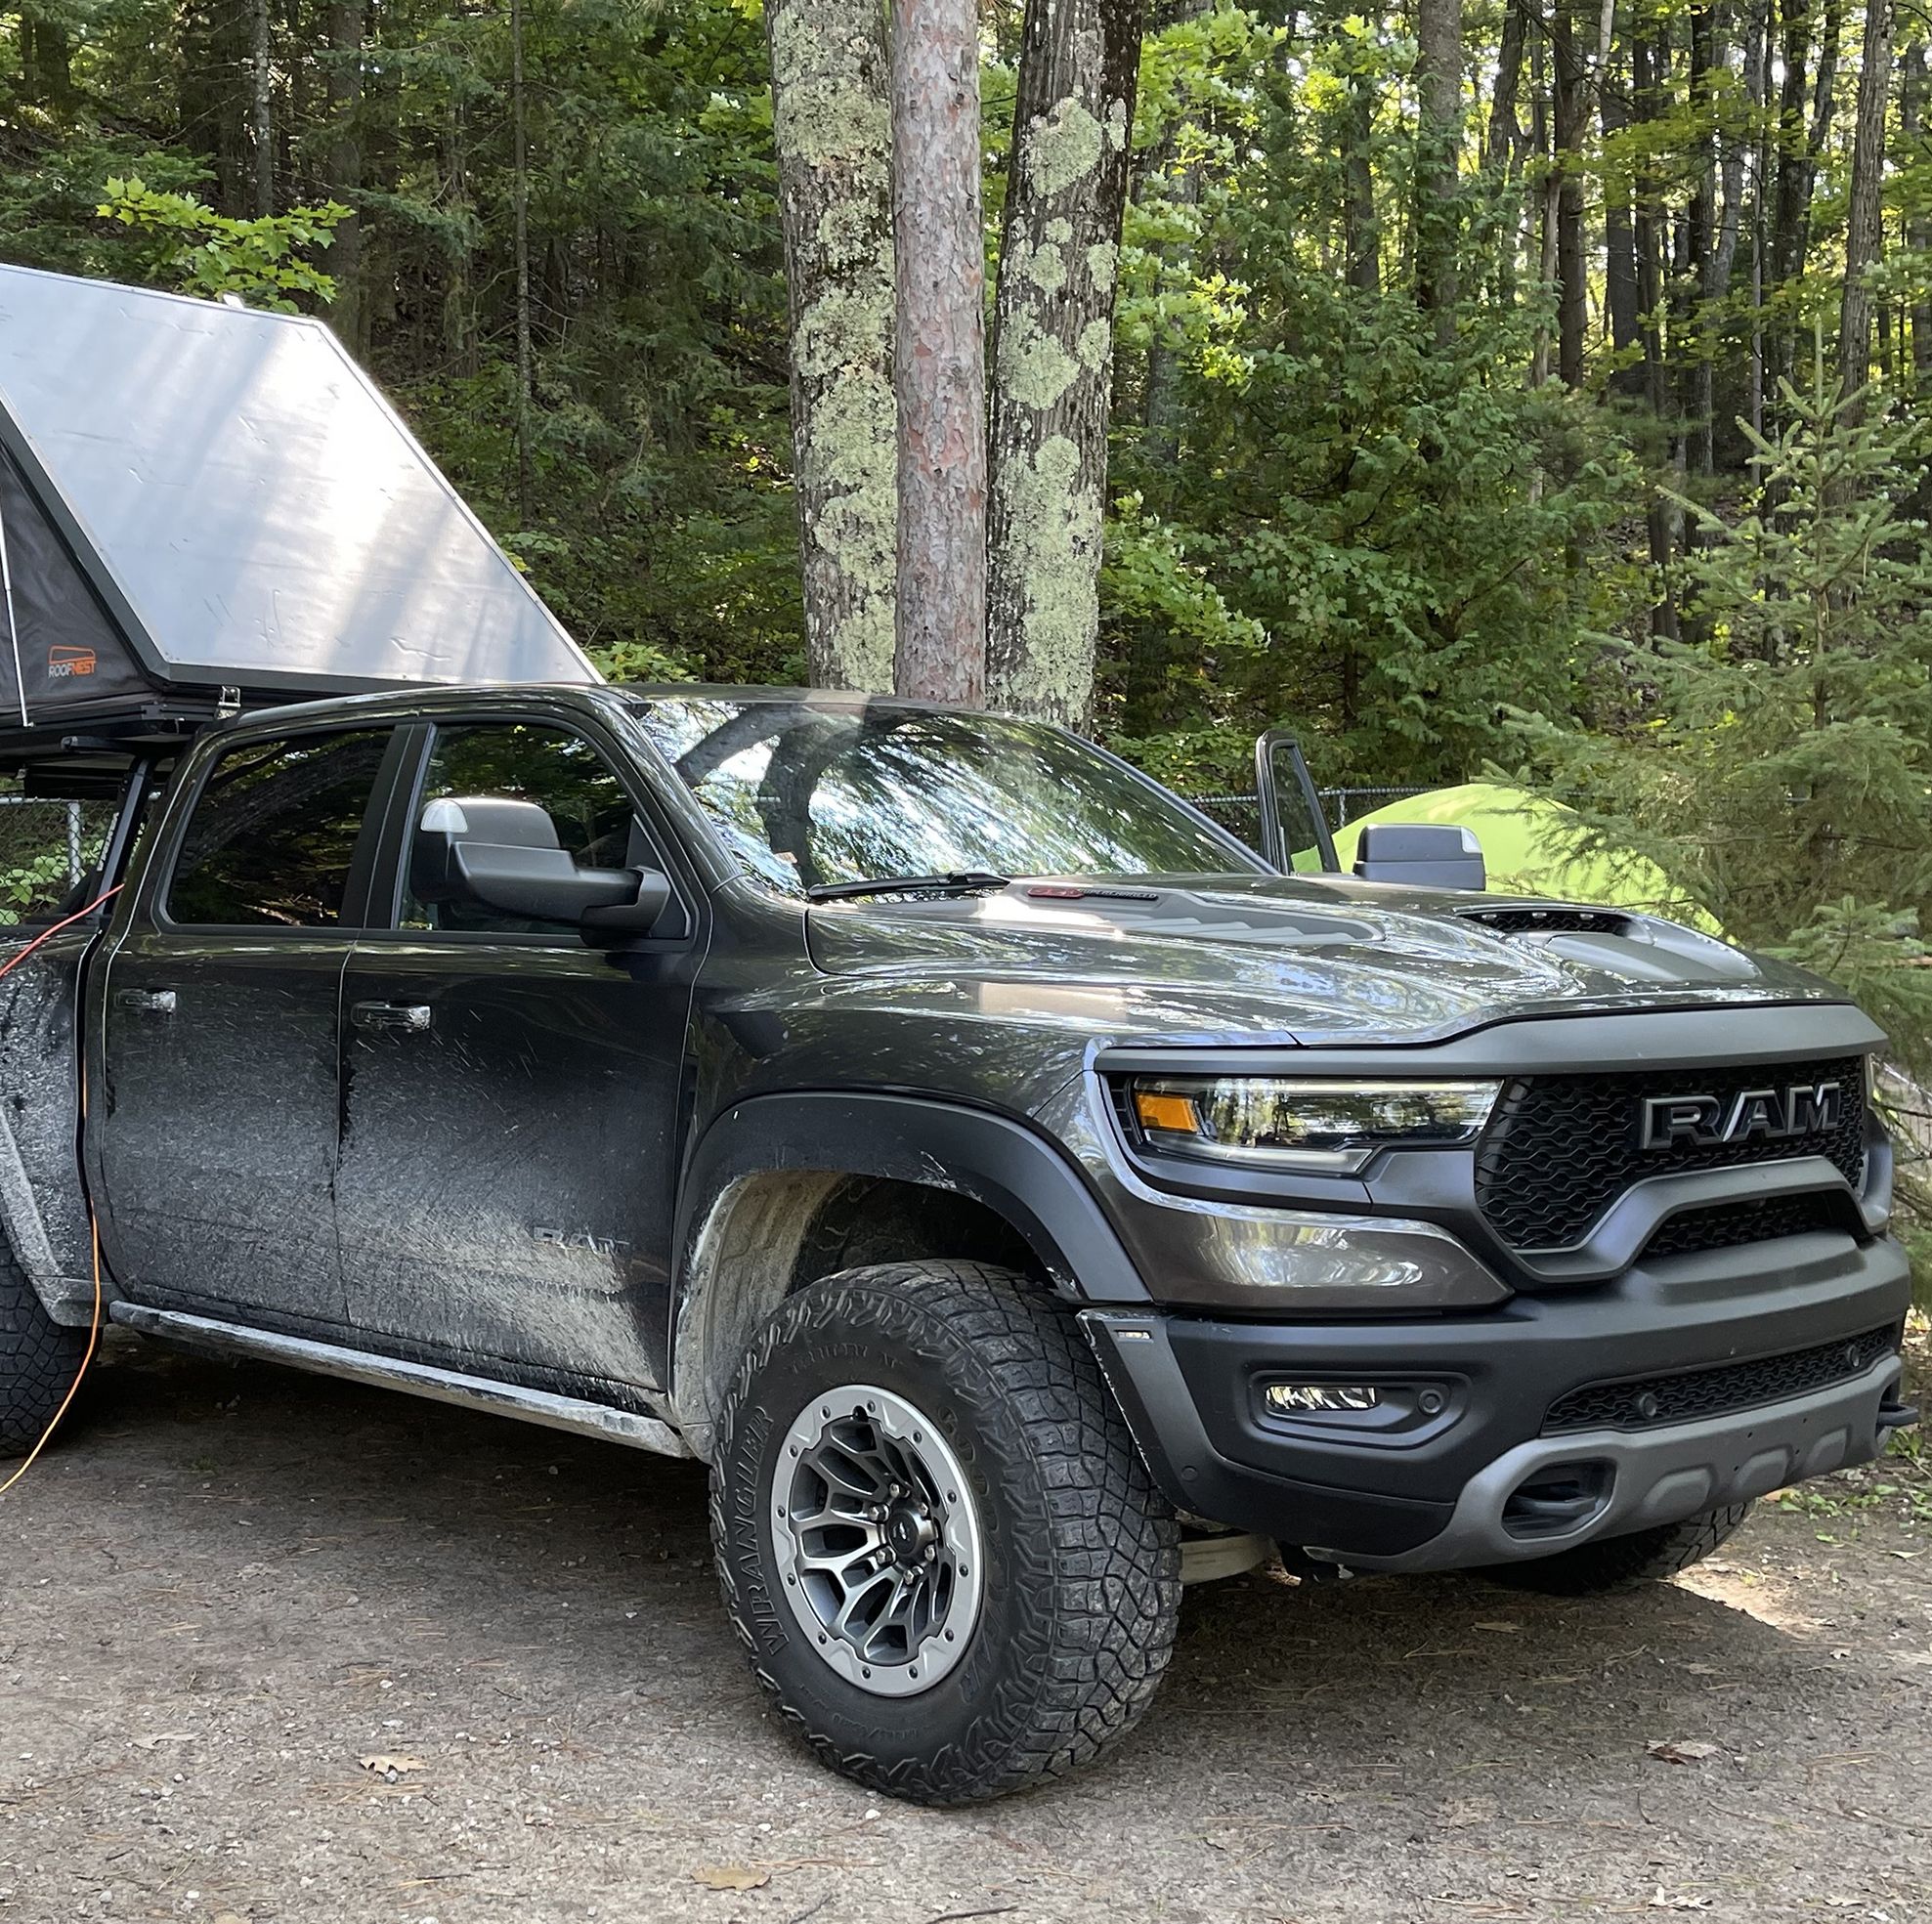 Ram TRX Owner's Two-Year Review Begins With Trip To Gas Station